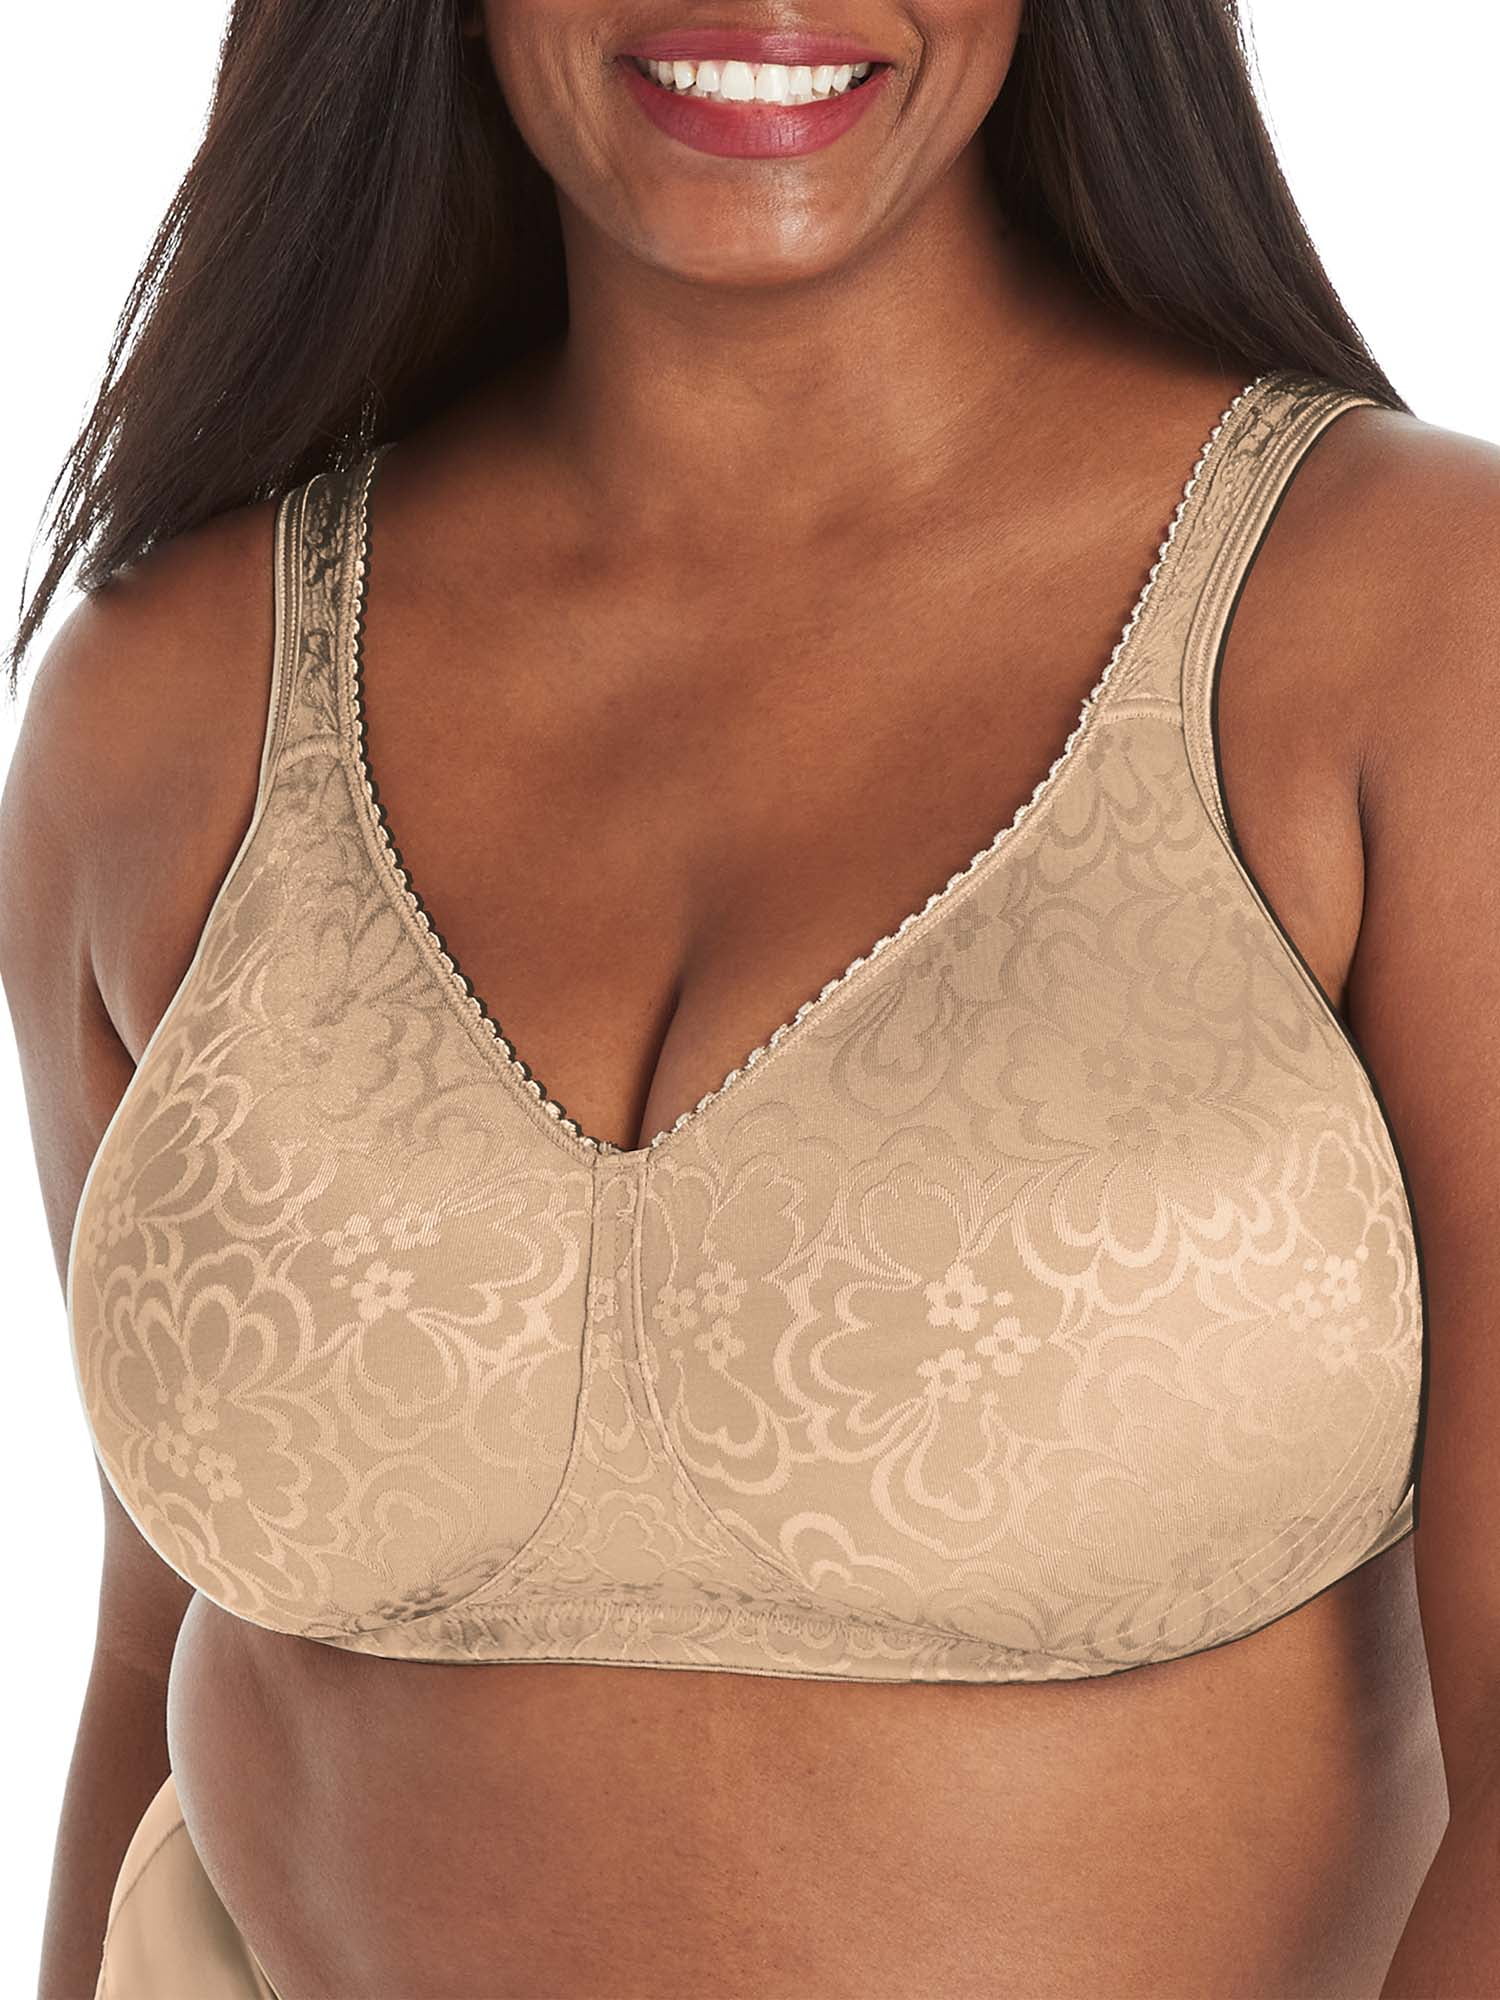 Playtex 18 HOURS GORGEOUS LIFT WITH BOOST PANELS WIRE-FREE BRA Pick yours NEW 